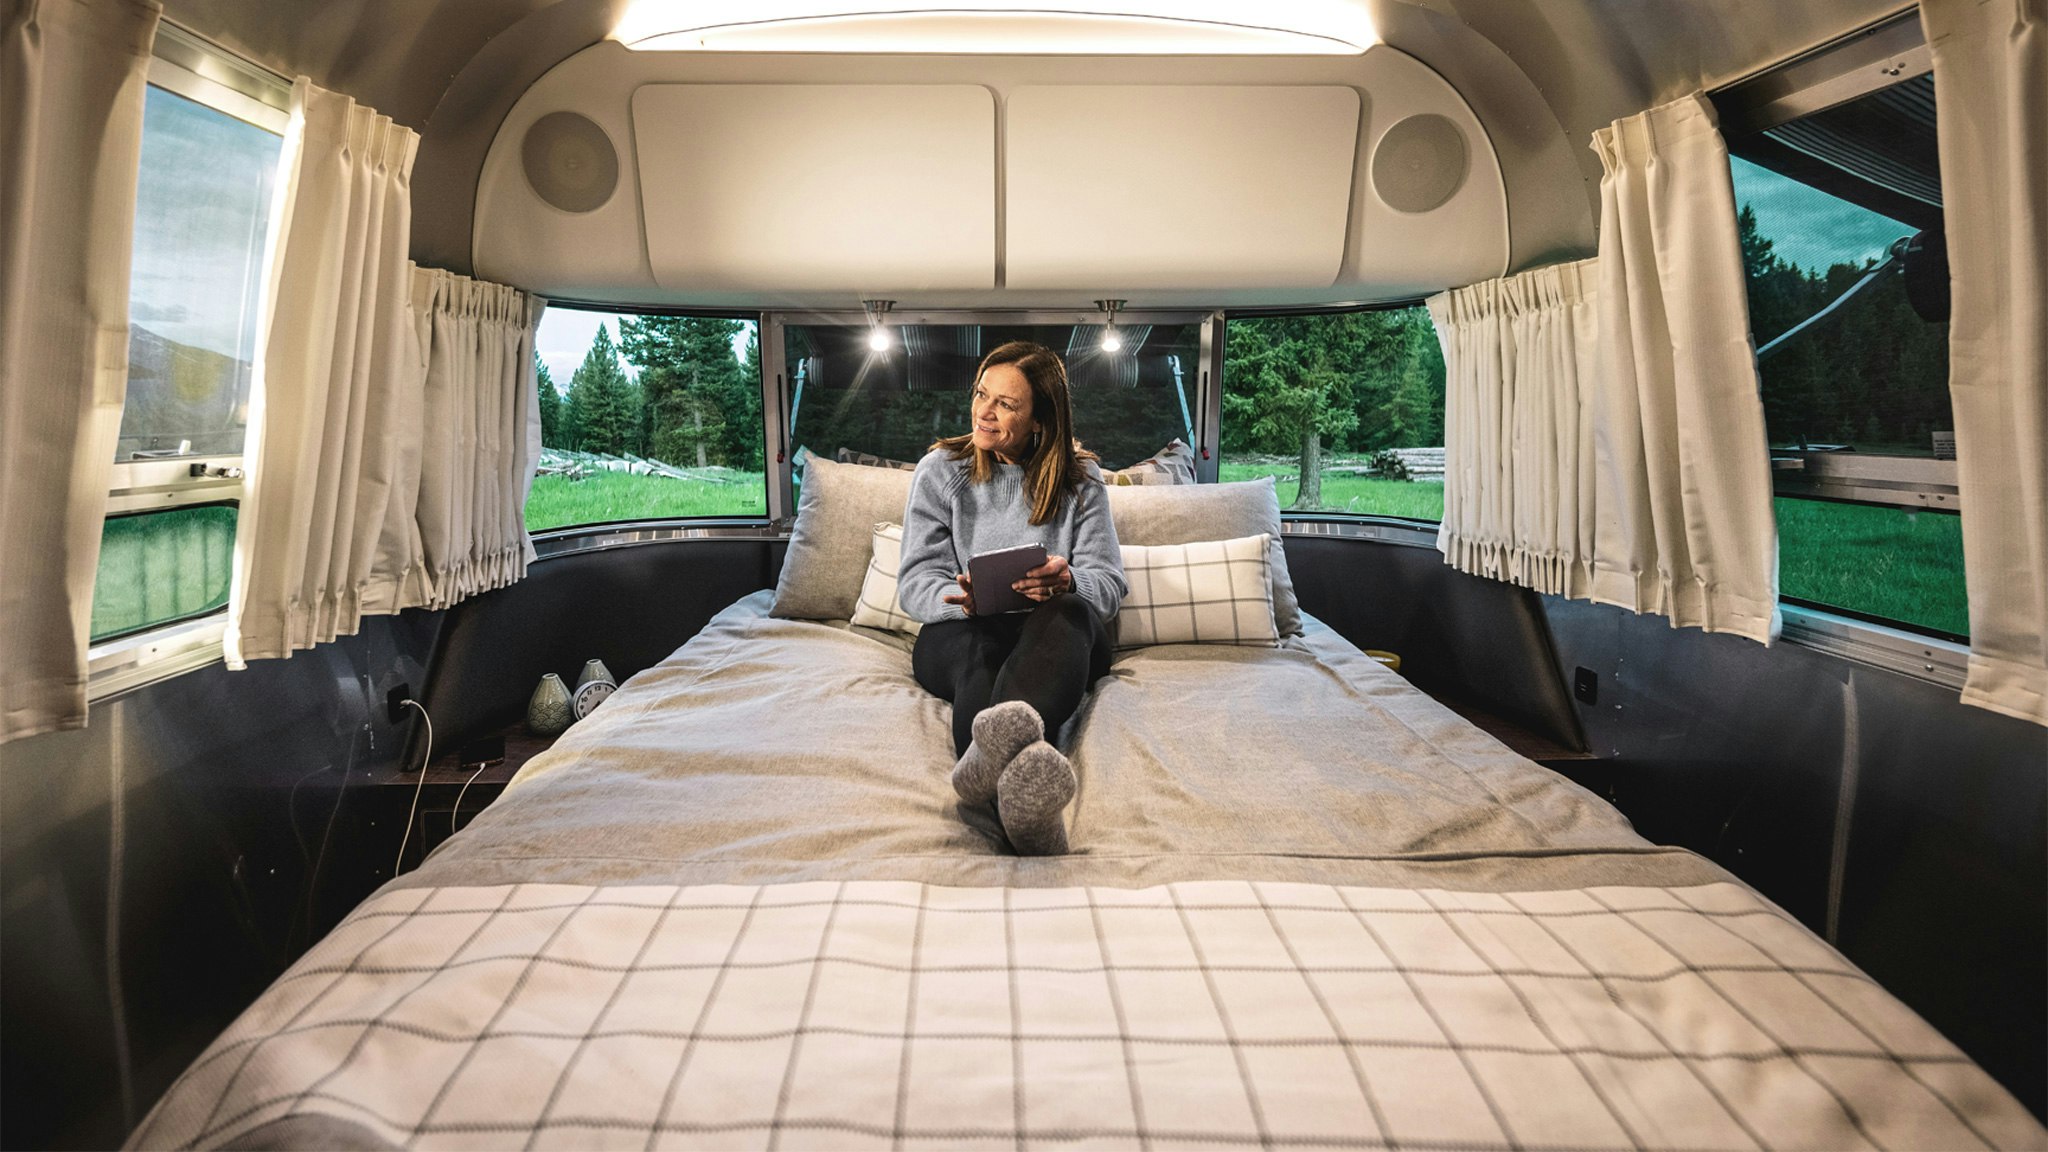 A woman camper sitting on the bed looking at her tablet in her Airstream Globetrotter travel trailer.